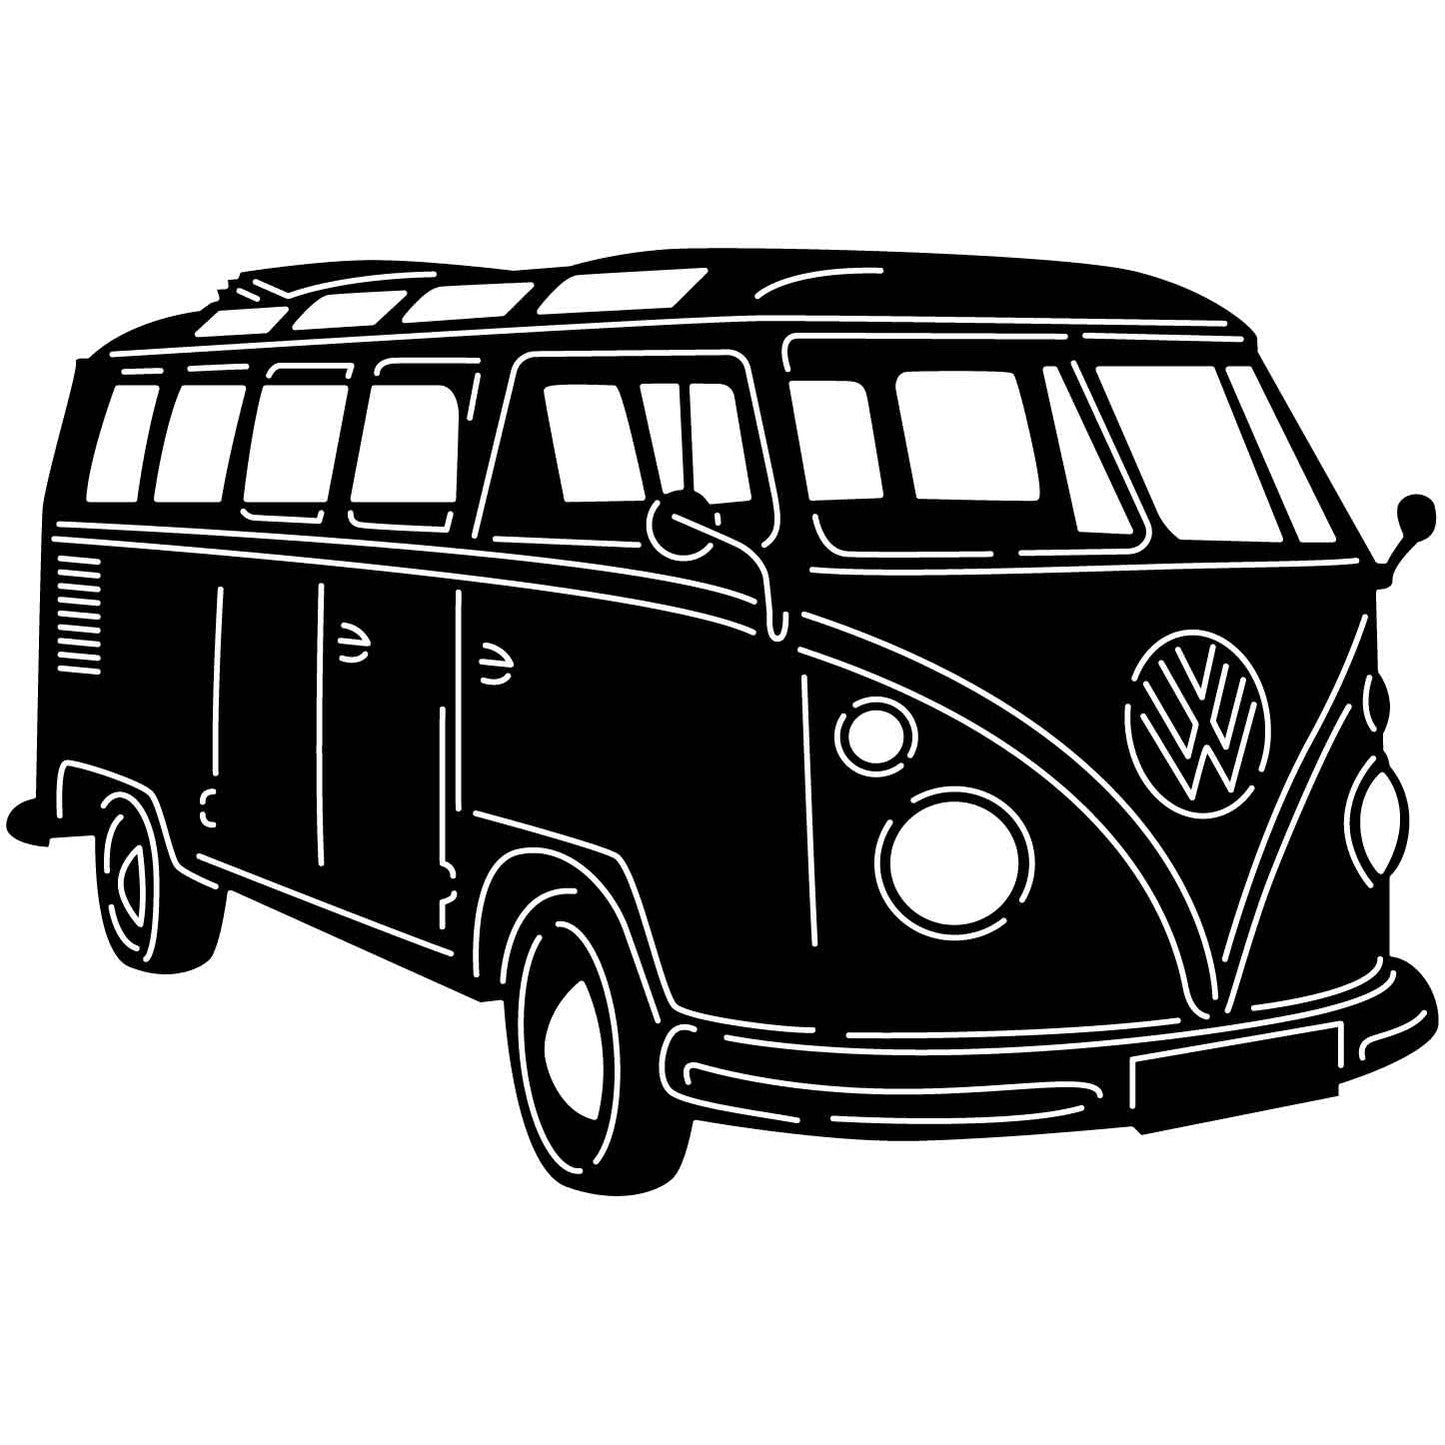 VW combi 17 DXF File Cut Ready for CNC